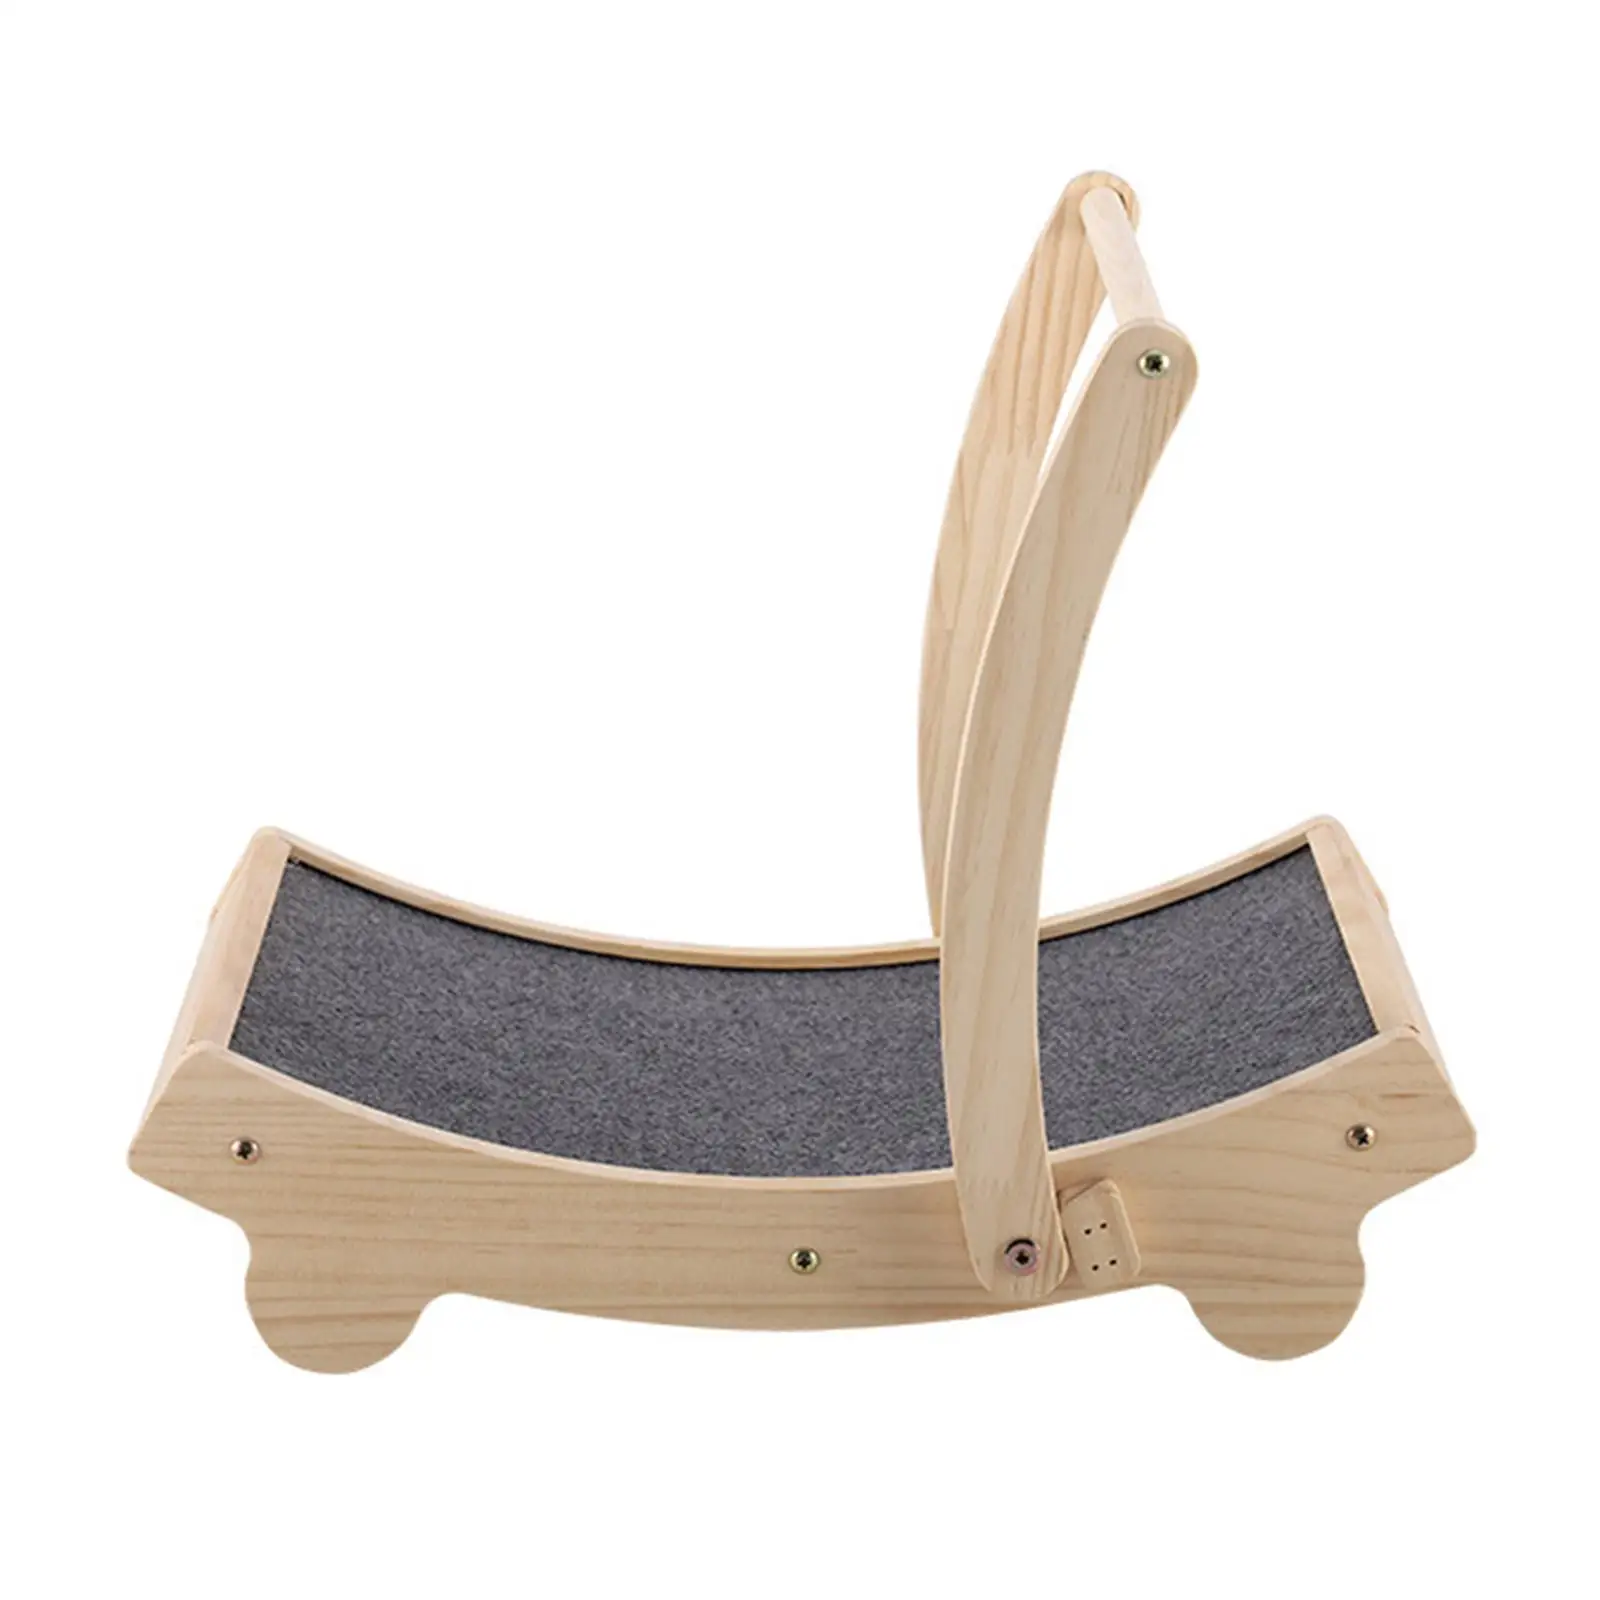 Pet Cat Scratcher Bed Wear Resistant Interactive Toy Grinding Claw Scratch Pad Cat Bed for Kitty Scratching Board Pet Supplies